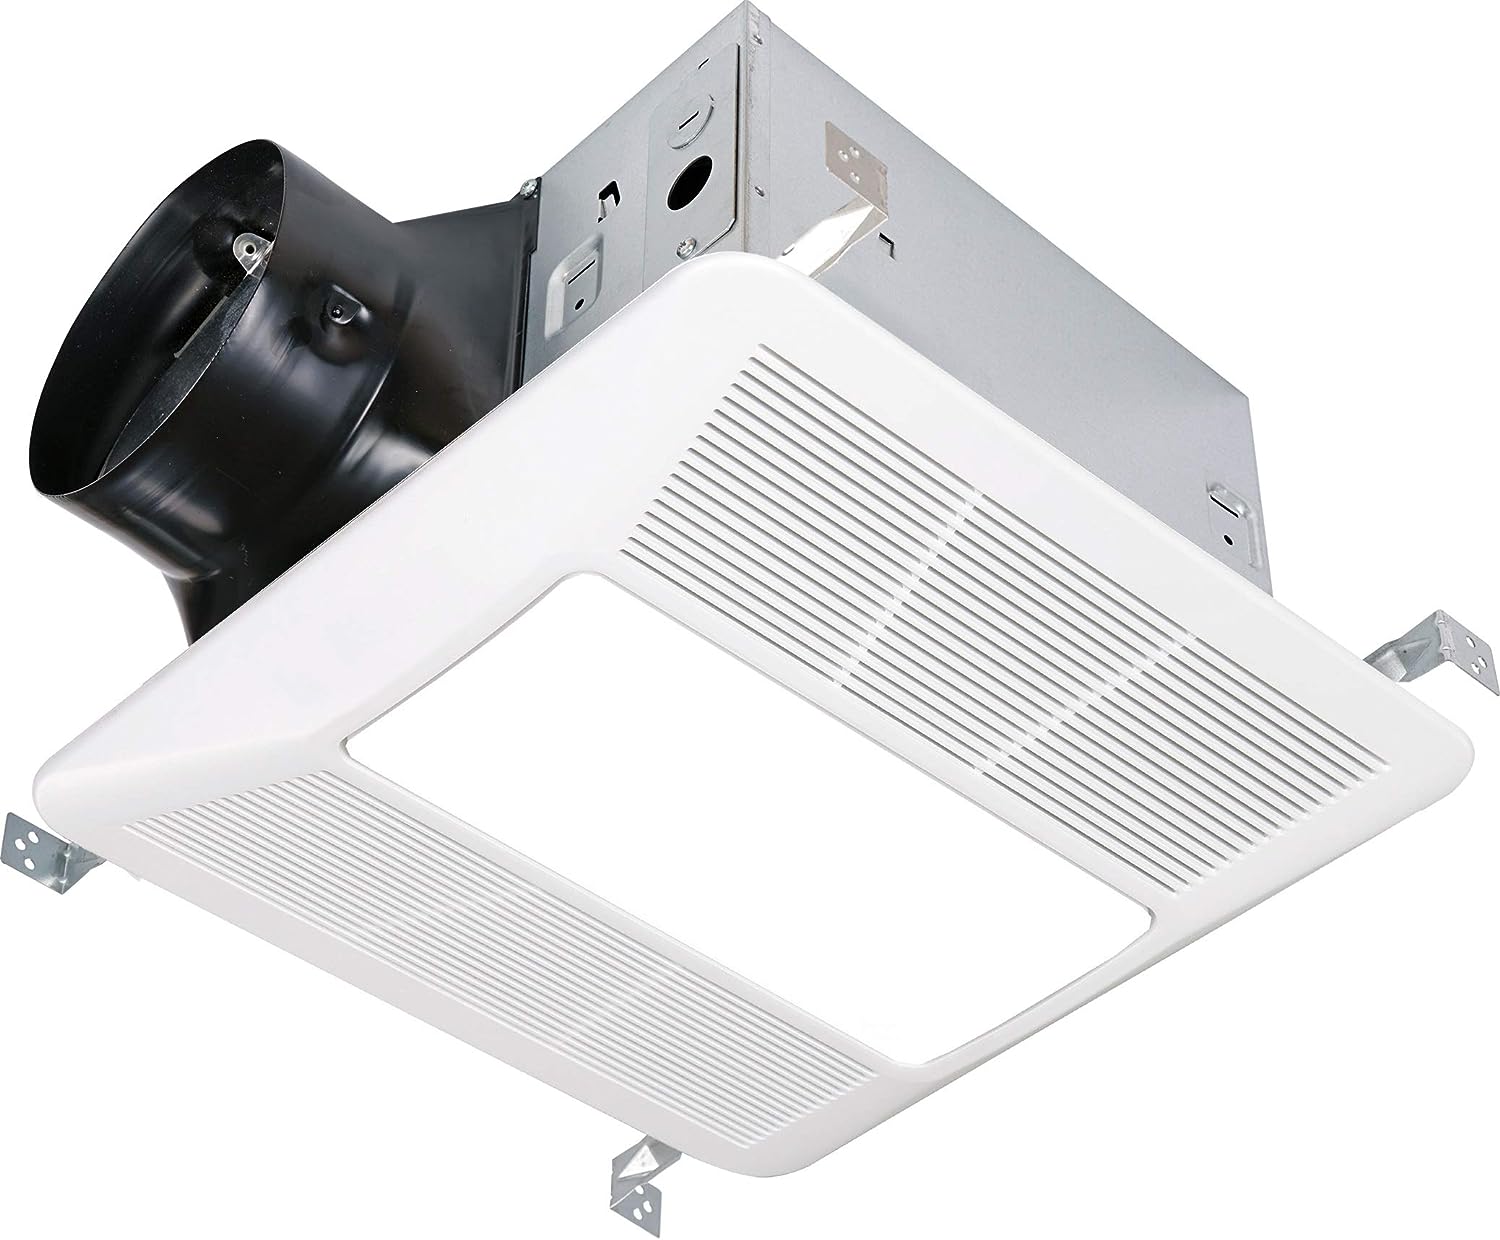 What Is The Quietest Bathroom Exhaust Fan With Light